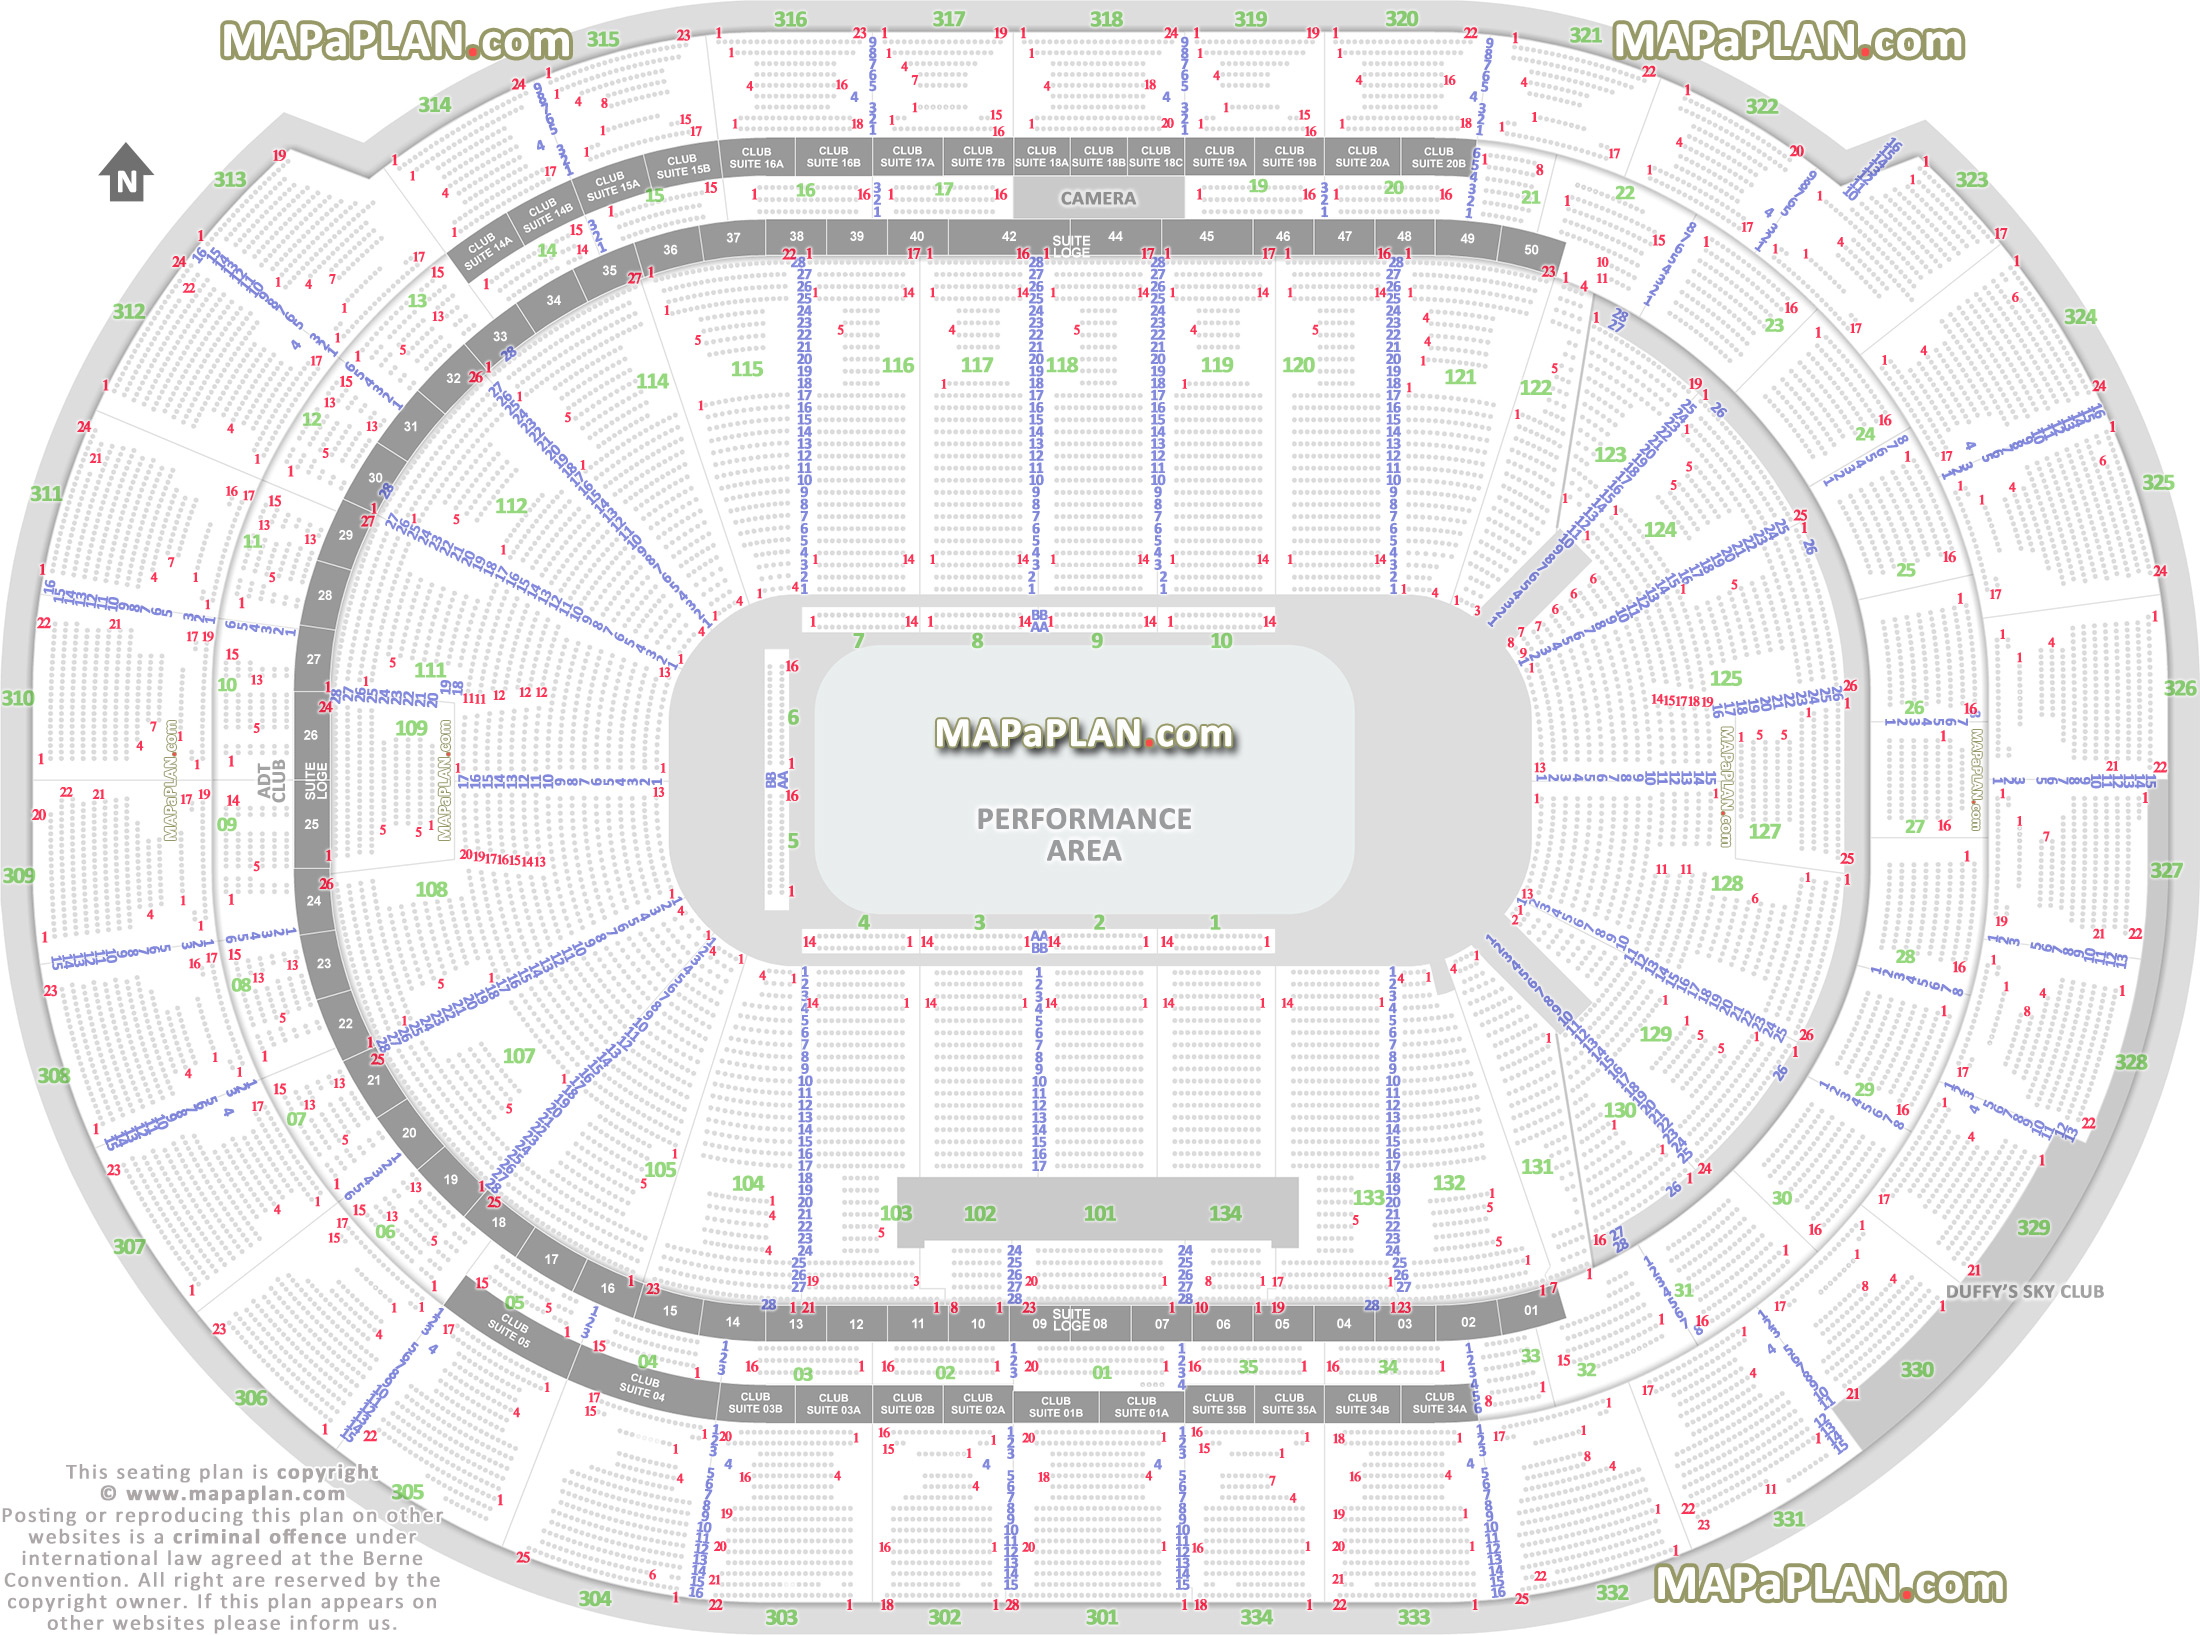 performance area bank atlantic fort lauderdale miami florida popular sections 132 133 111 112 113 115 117 Sunrise FLA Live Arena seating chart